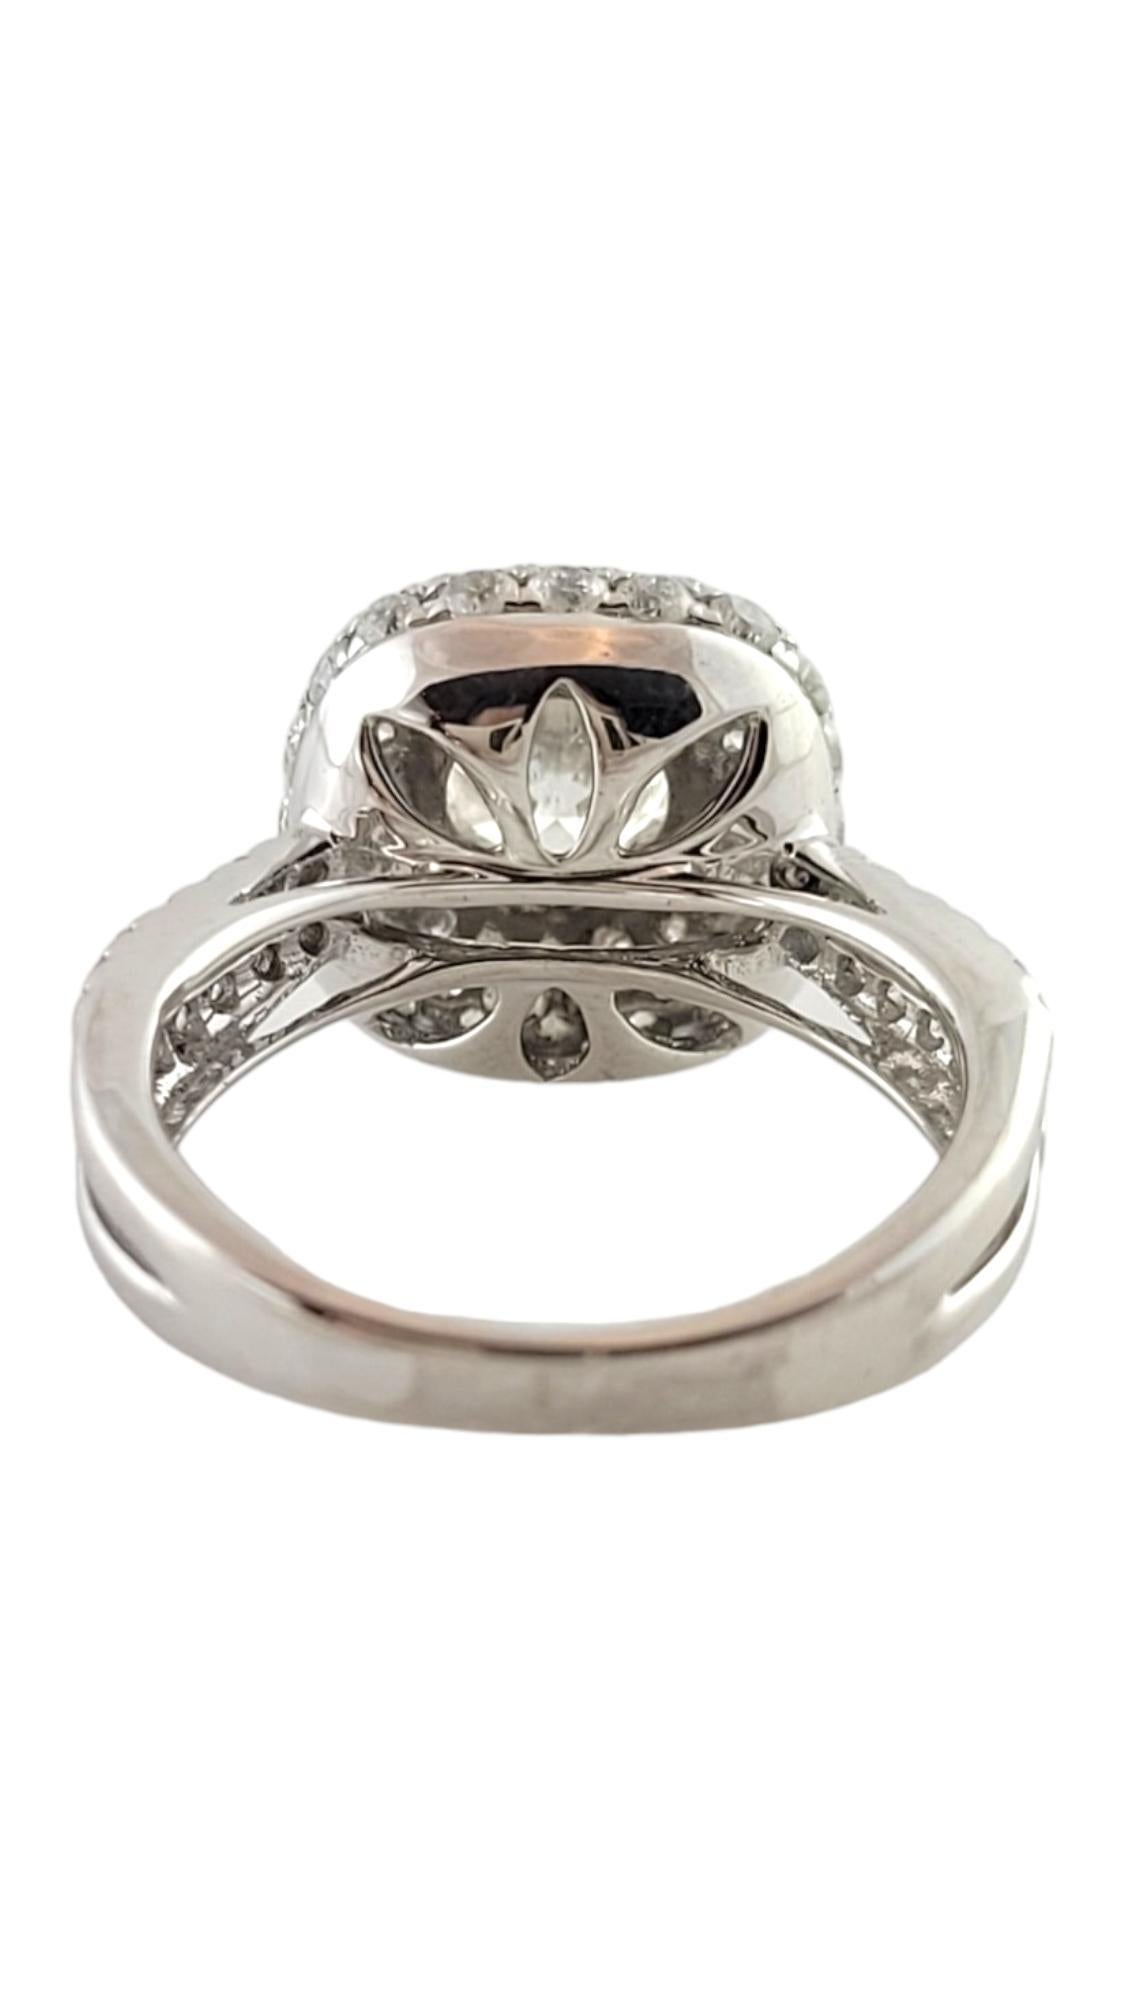 14K White Gold Diamond Halo Engagement Ring 1.94cttw. Certified #16953 In Good Condition For Sale In Washington Depot, CT